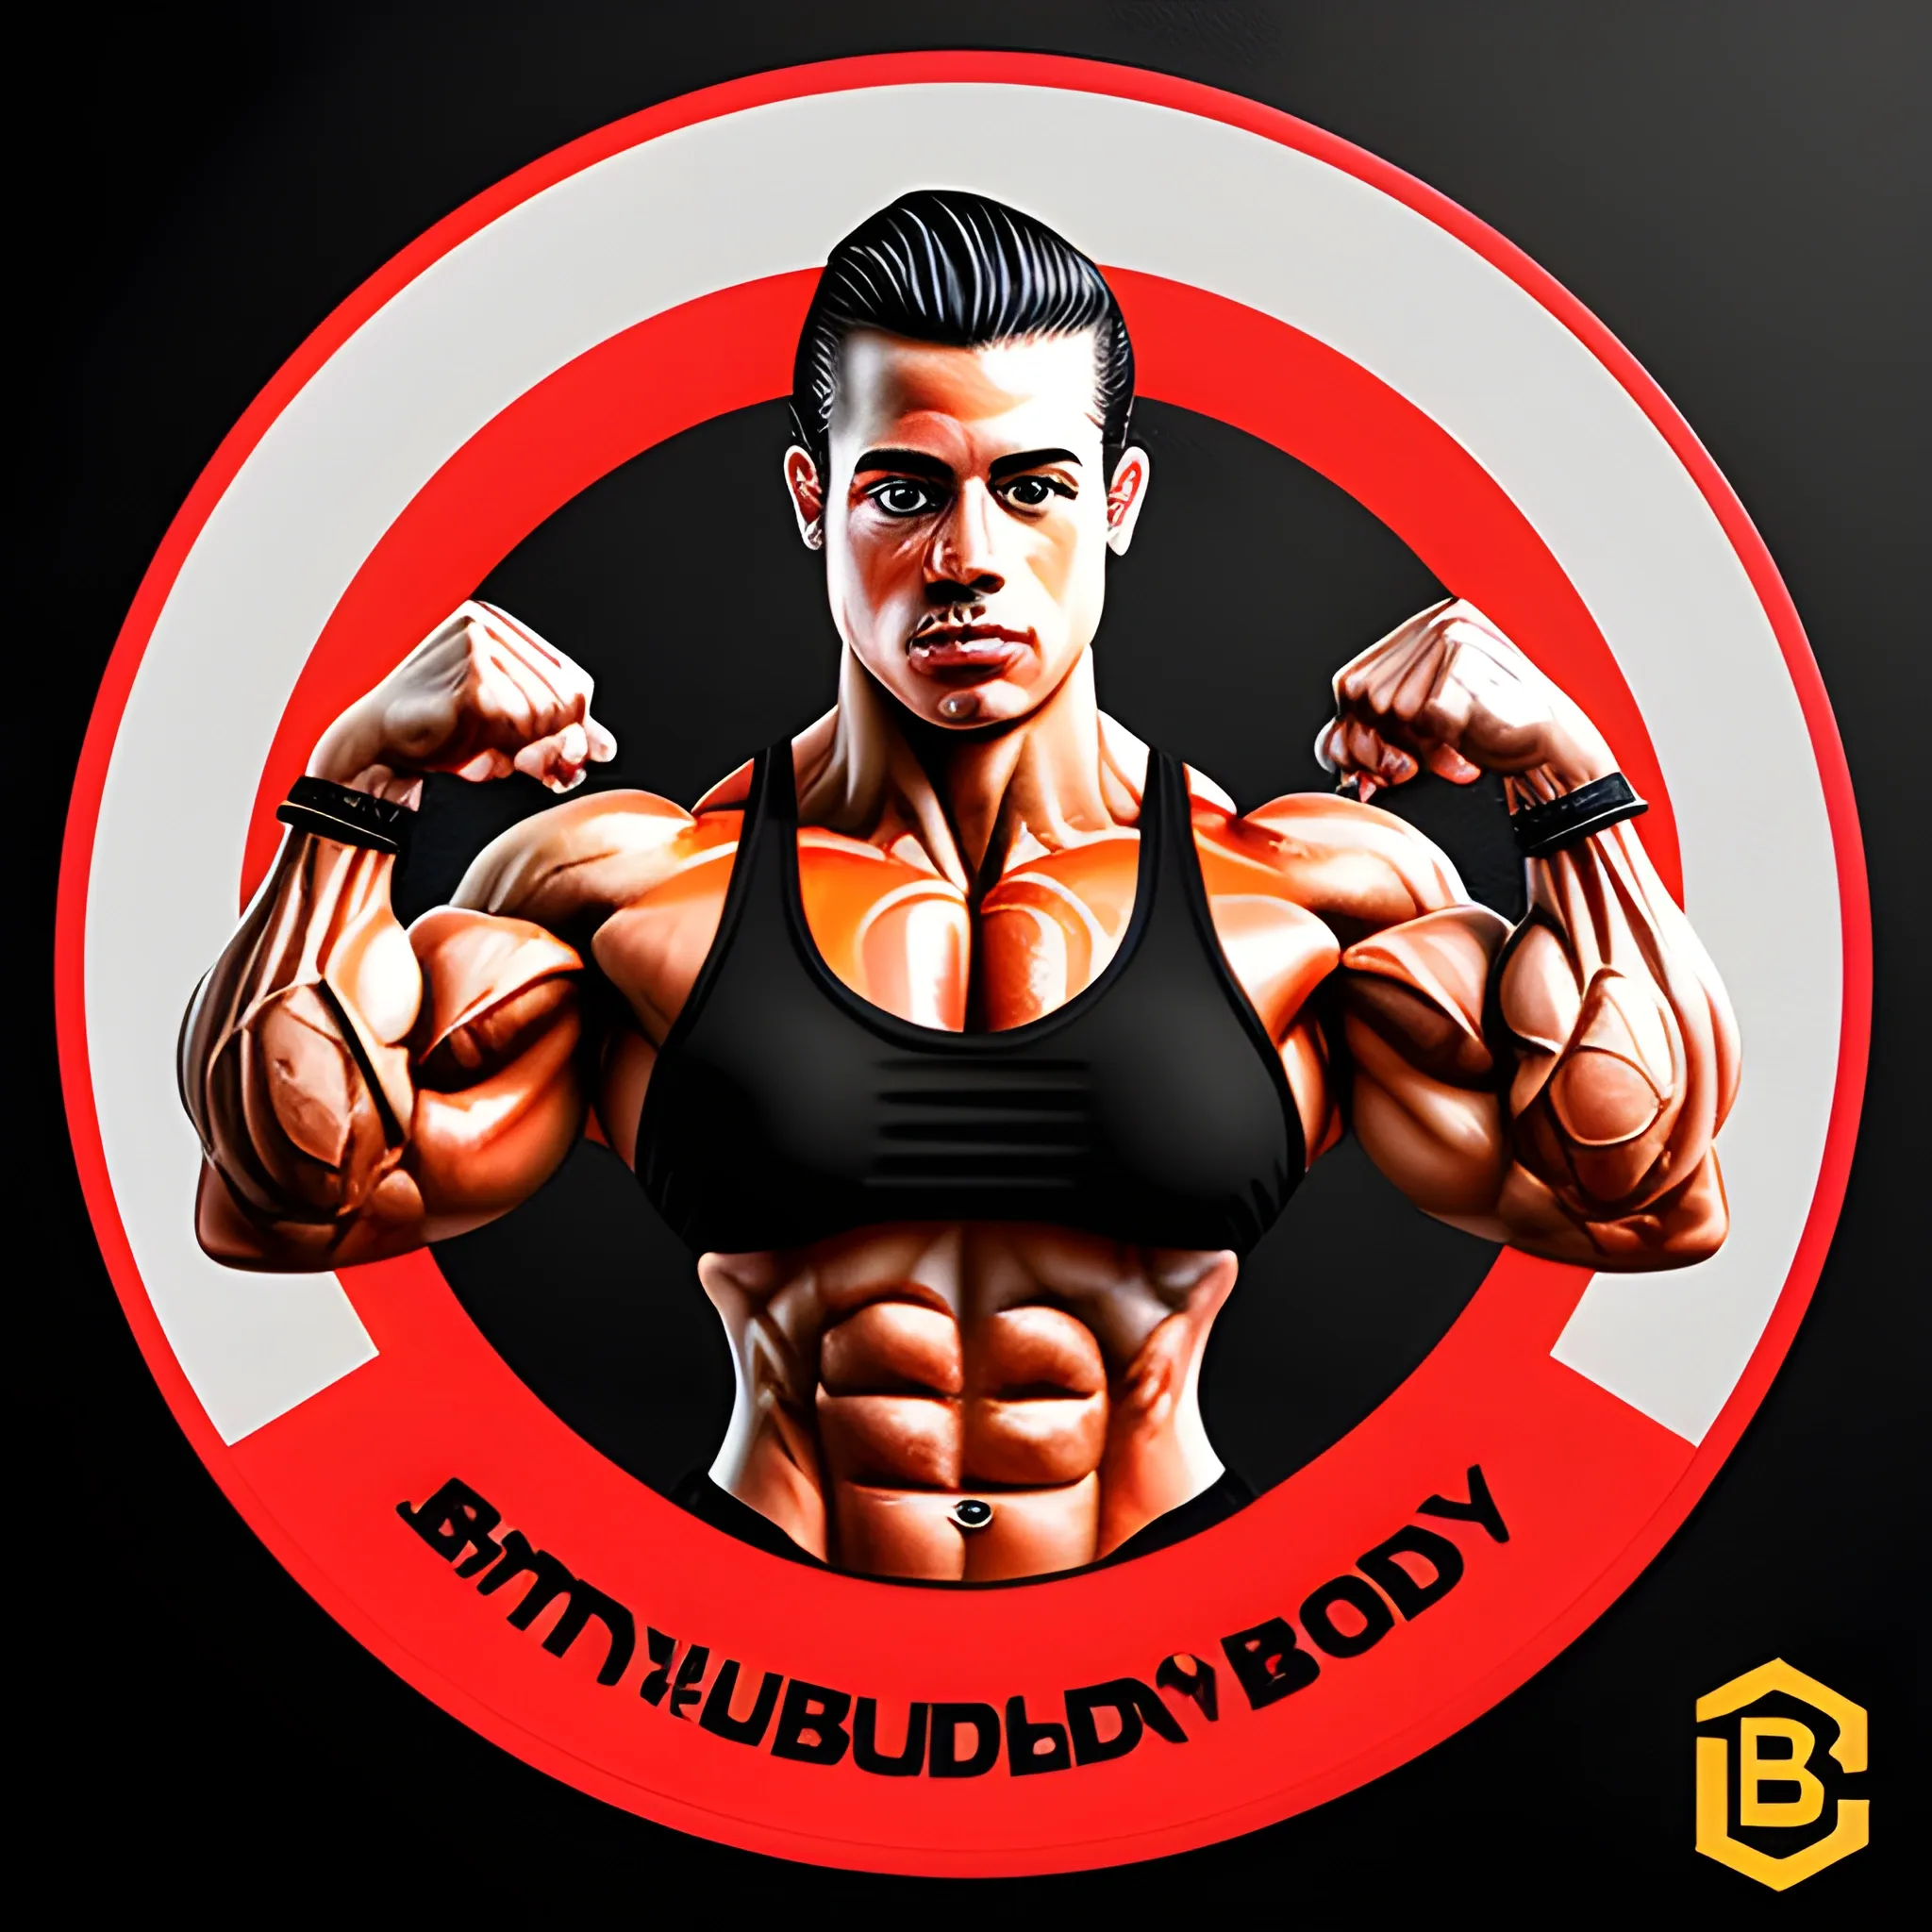 Circle Logo for a Sportbrand
Bodybuilding Pose
Name is BodyBuddy
Shortform is BB
Zyzz motivation
Colours: red, Oil Painting